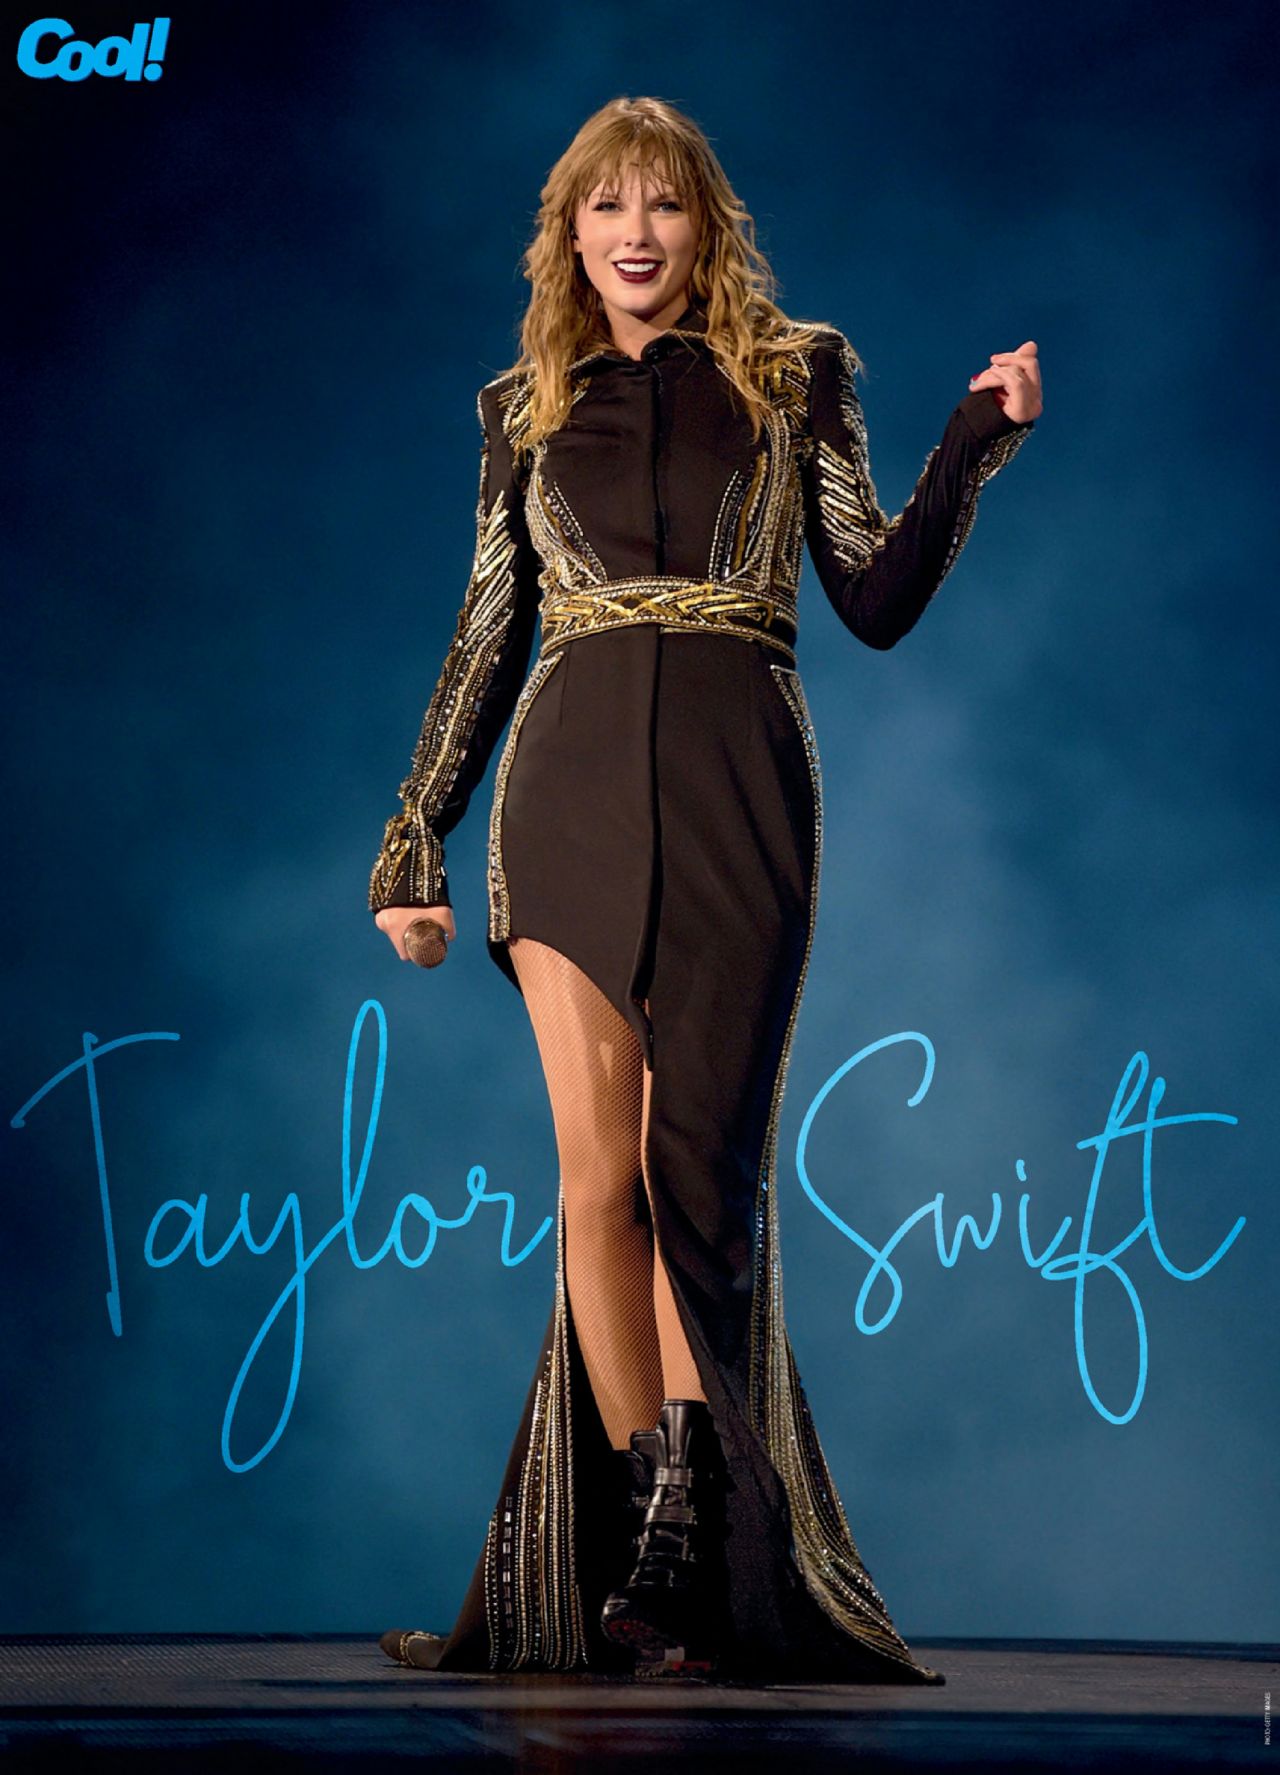 taylor-swift-cool-canada-october-2020-issue-5.jpg